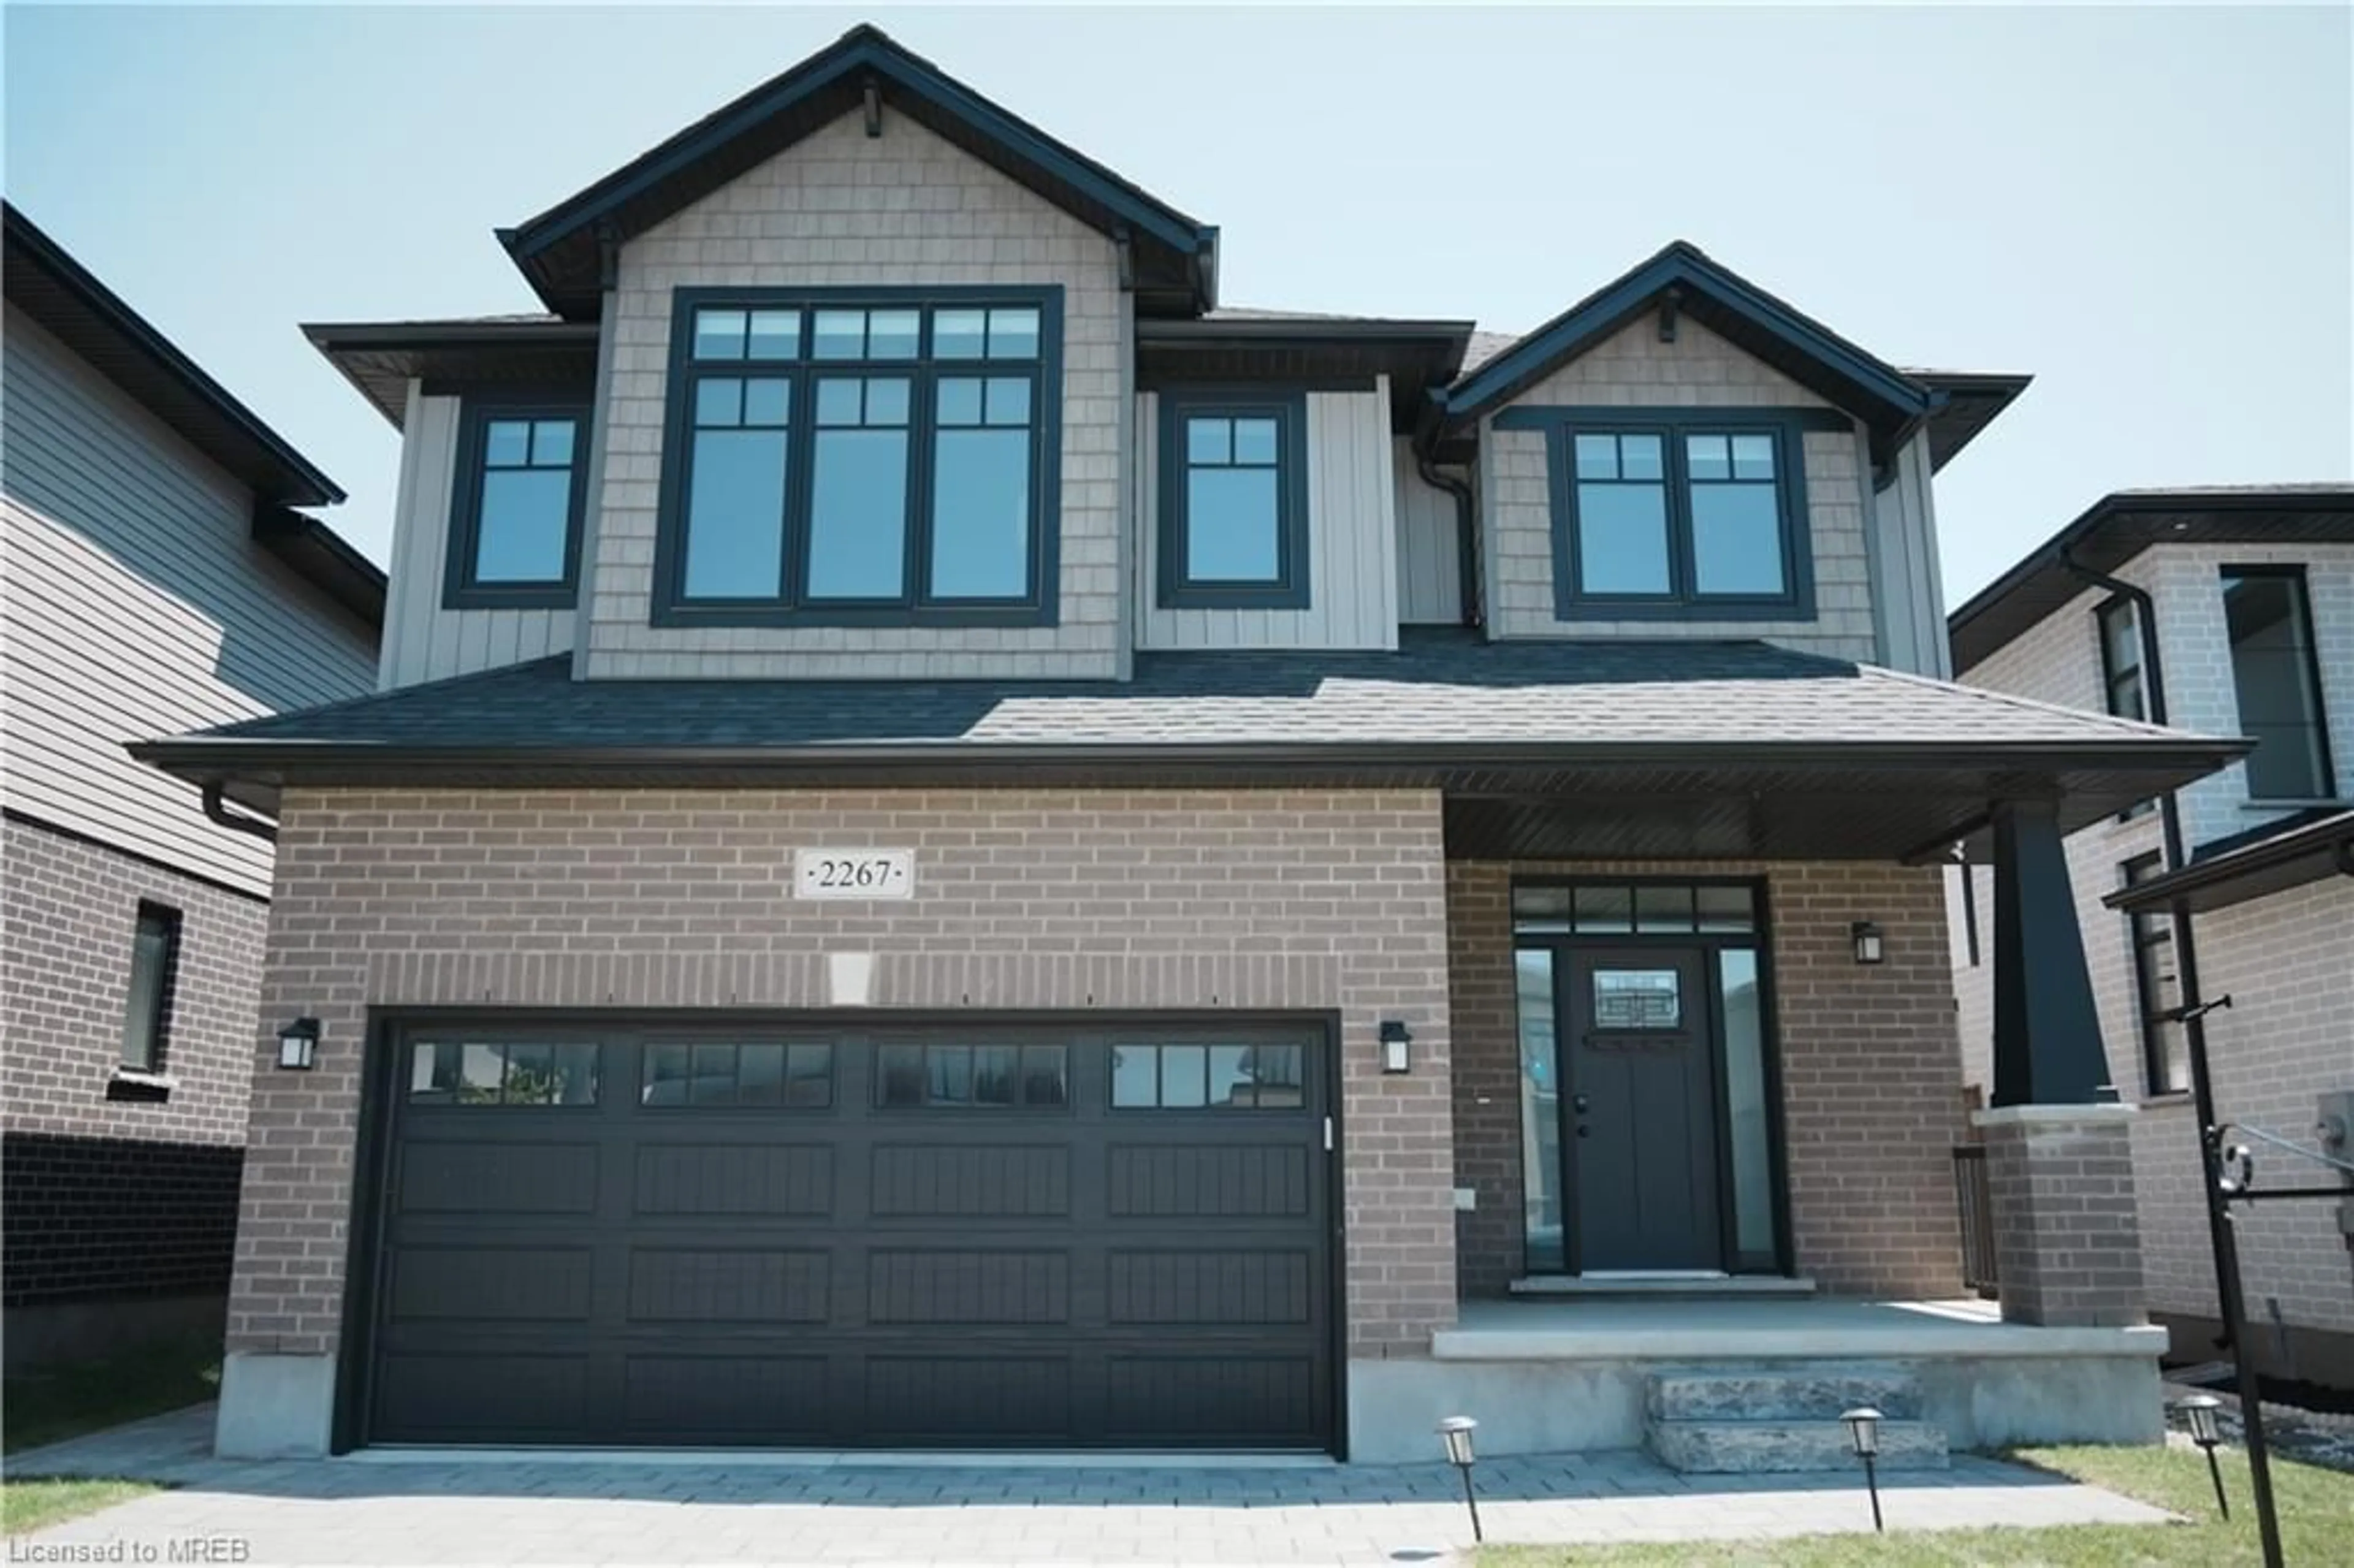 Home with brick exterior material for 2267 Tokala Trail, London Ontario N6G 0V8